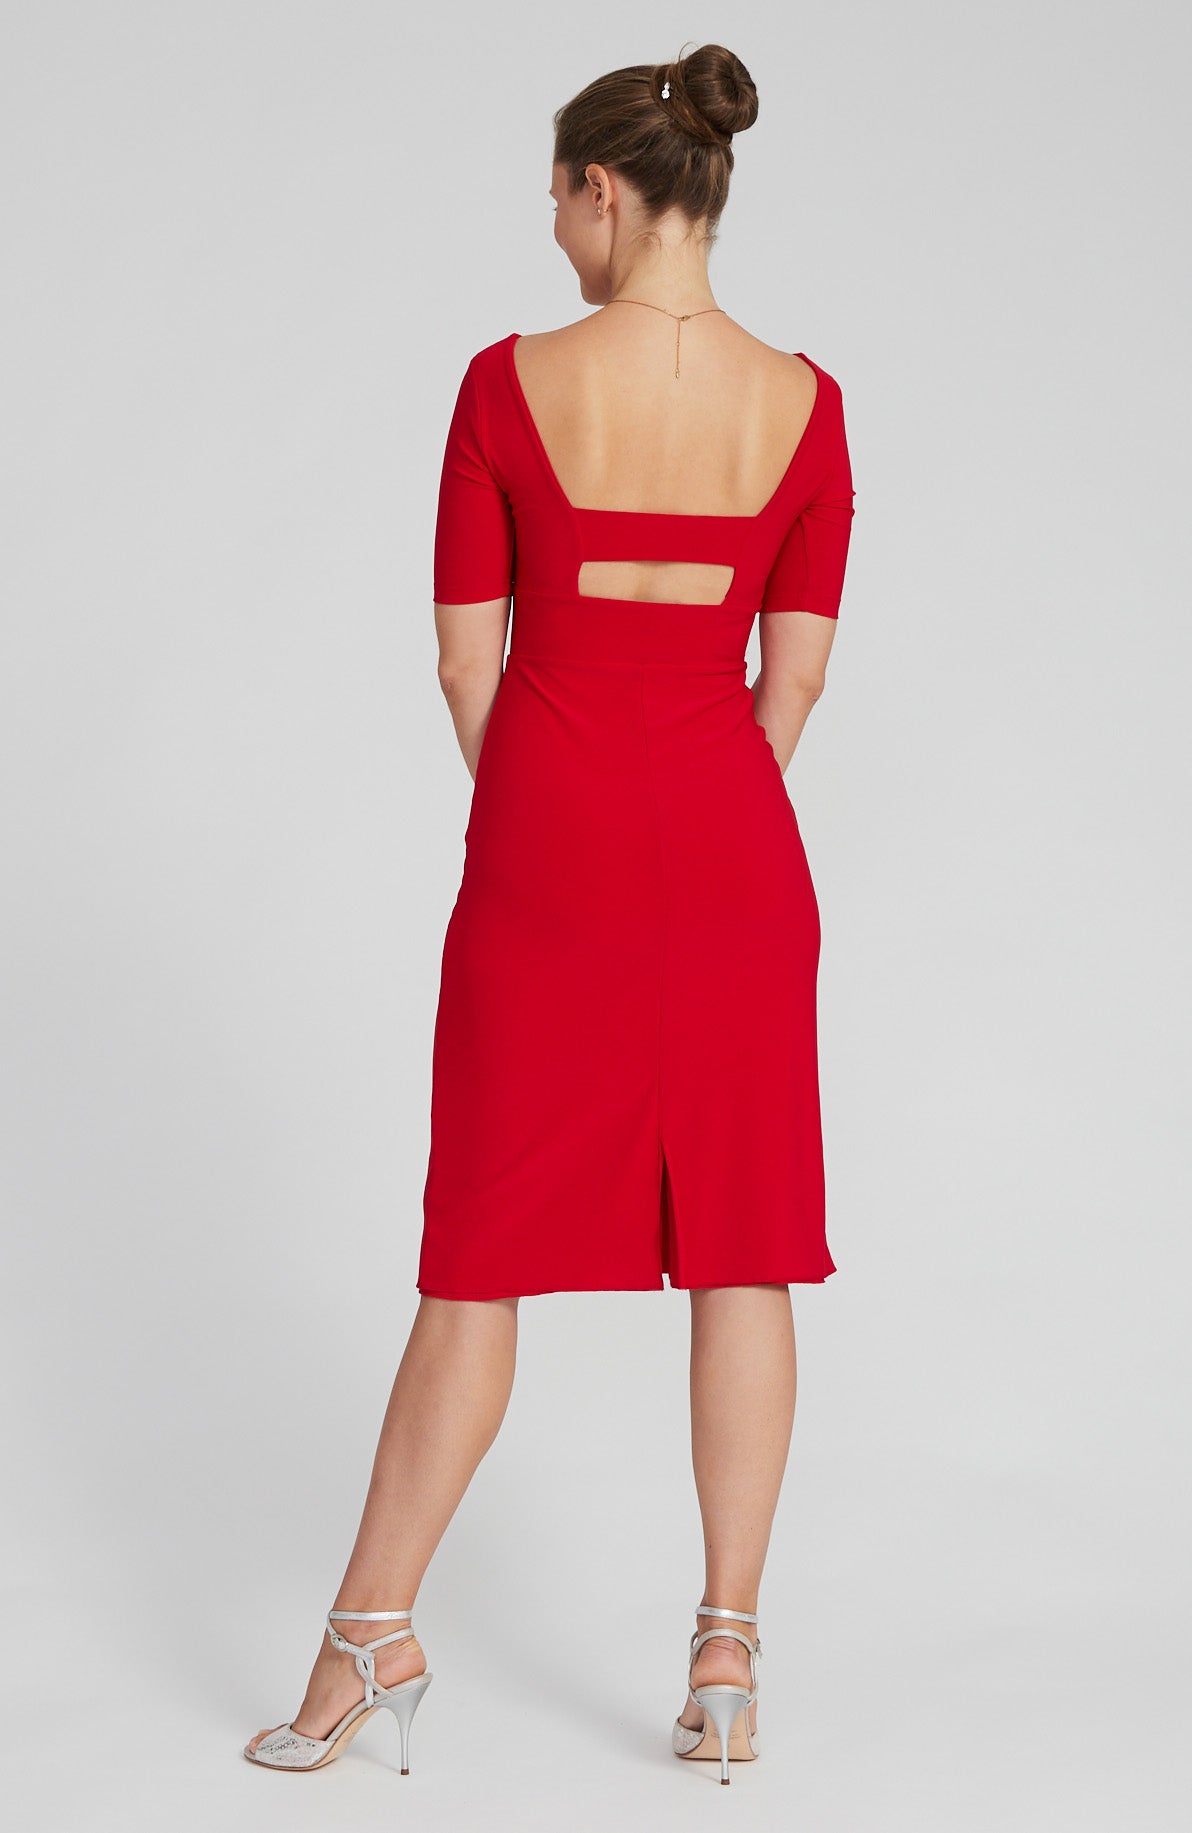 tango dress with sleeves in red with back cutout